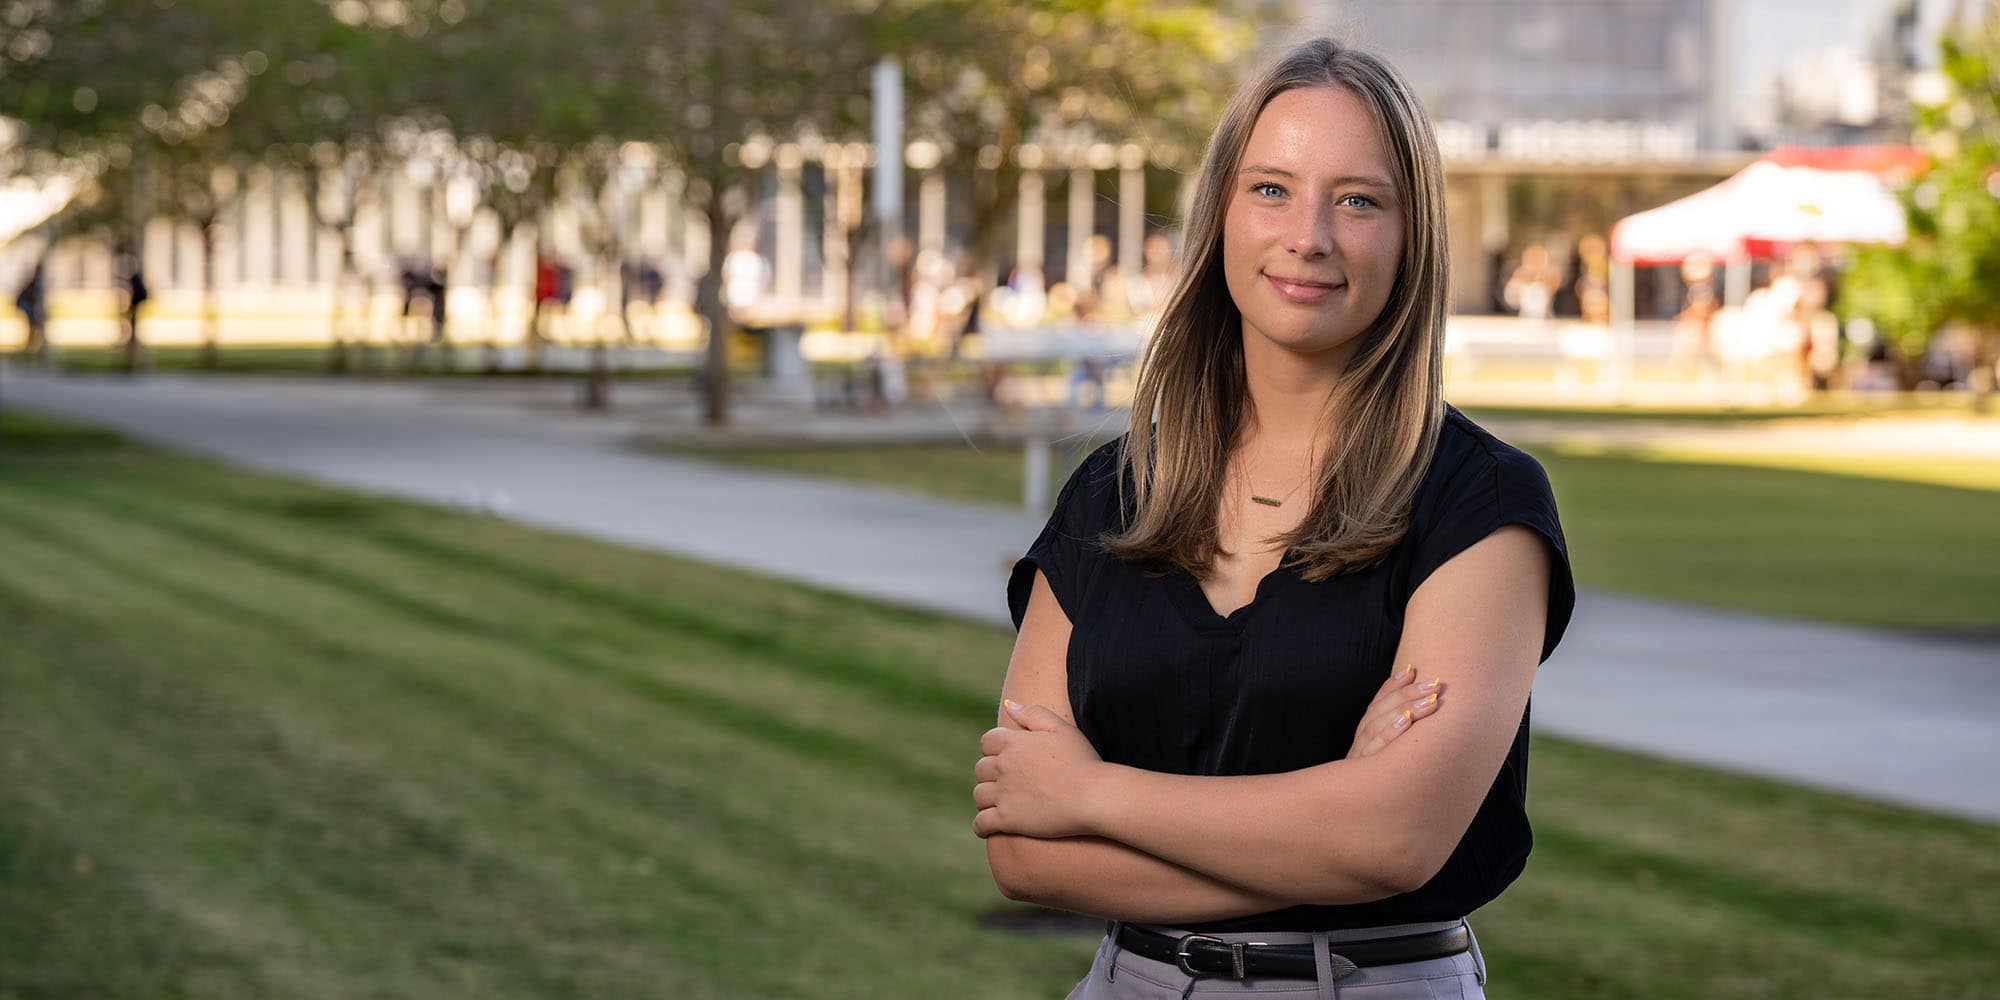 Sydney’s remote internship with Trusted Space sent her into her final semester with the confidence to succeed. (Photo: Embry‑Riddle / Bill Fredette-Huffman)